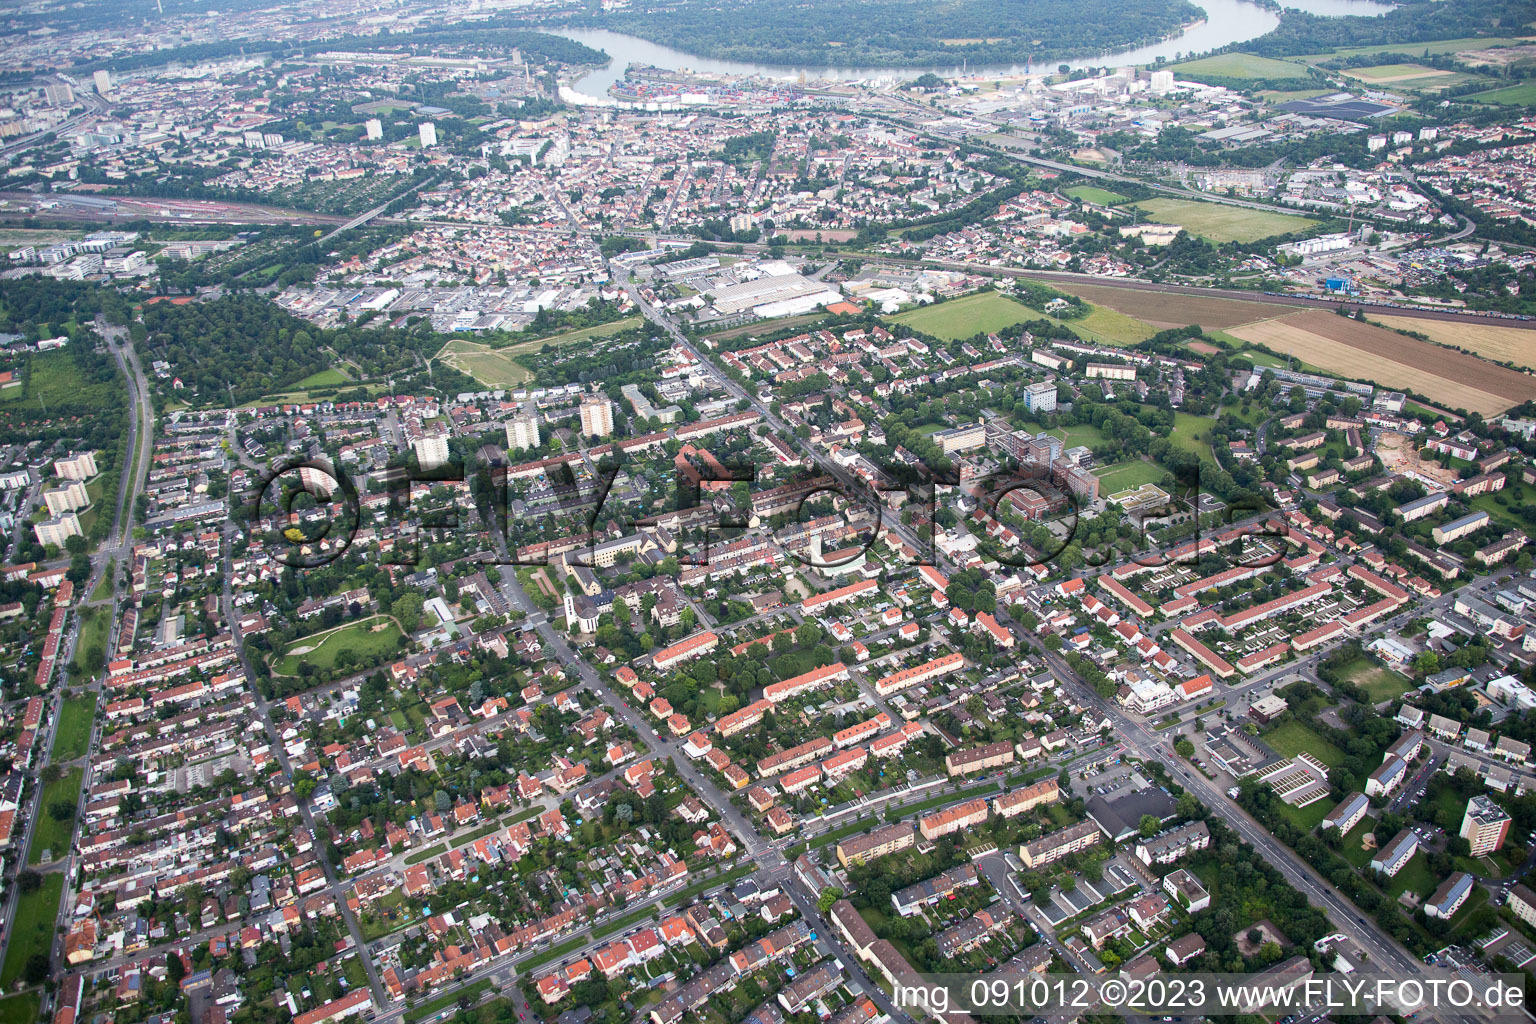 Aerial photograpy of District Gartenstadt in Ludwigshafen am Rhein in the state Rhineland-Palatinate, Germany